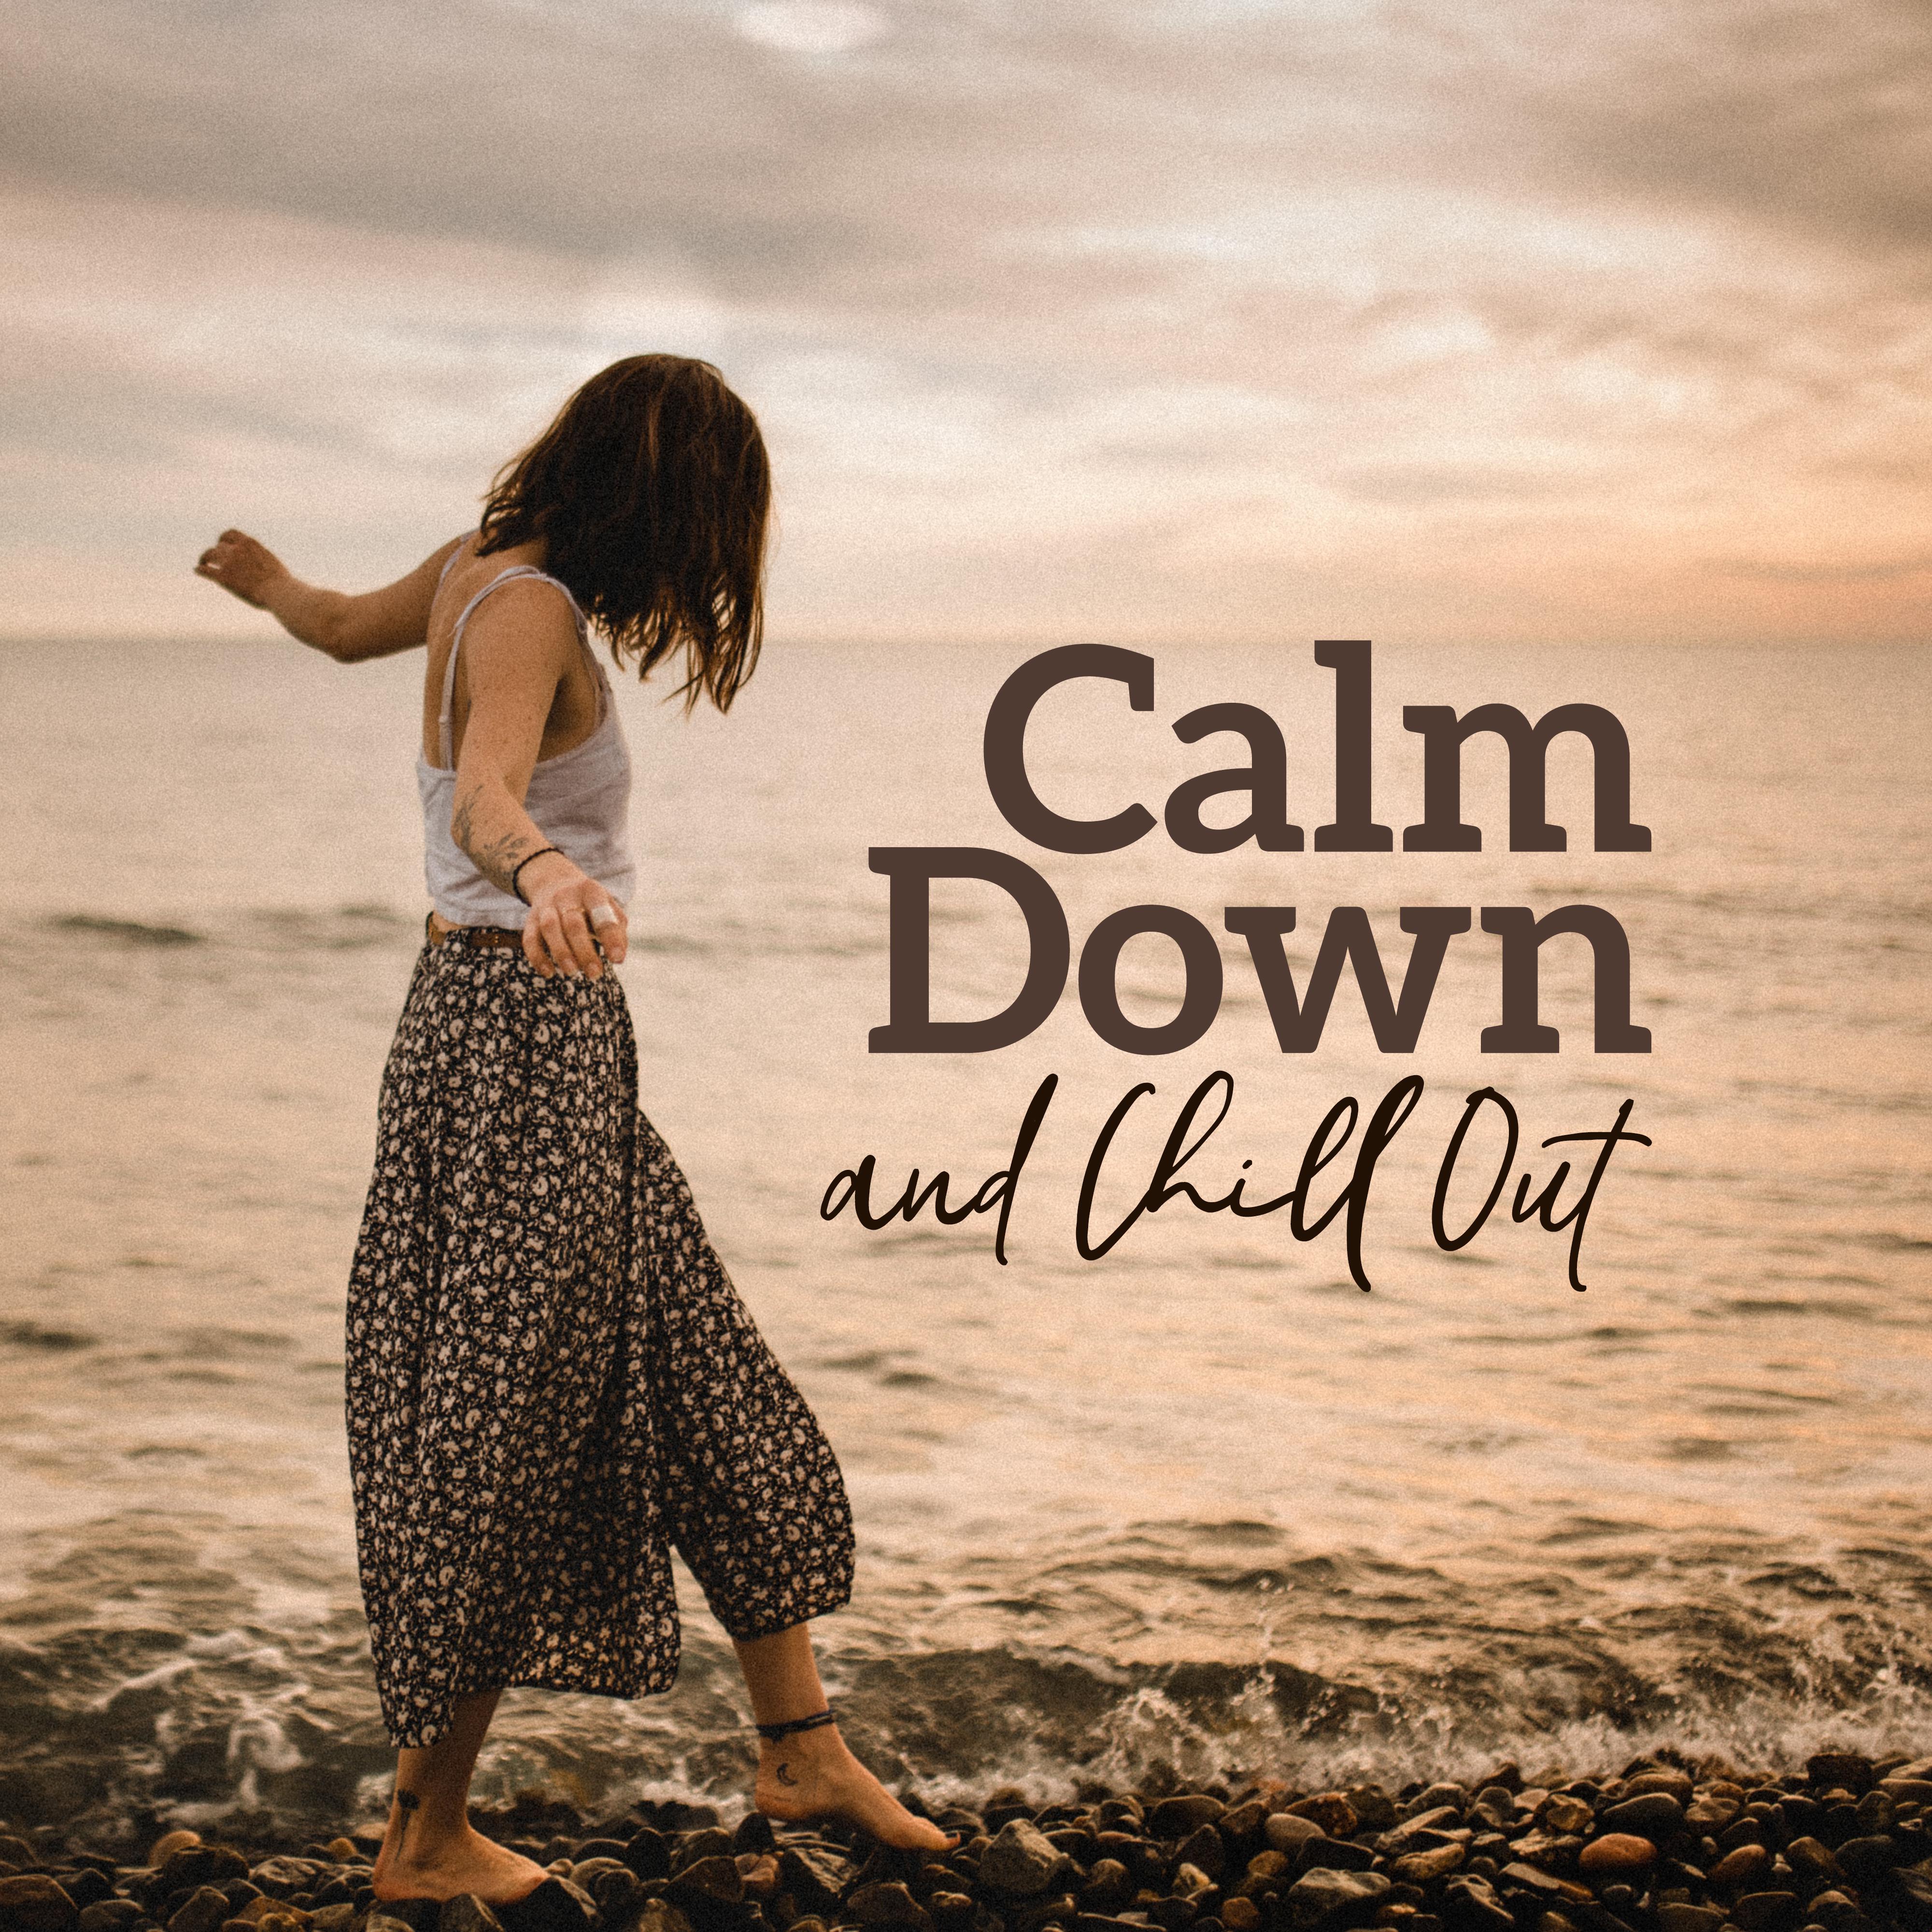 Calm Down and Chill Out: New Age Sounds that’ll Help You Calm Down, De-stress and Relax from Everyday Matters and Duties